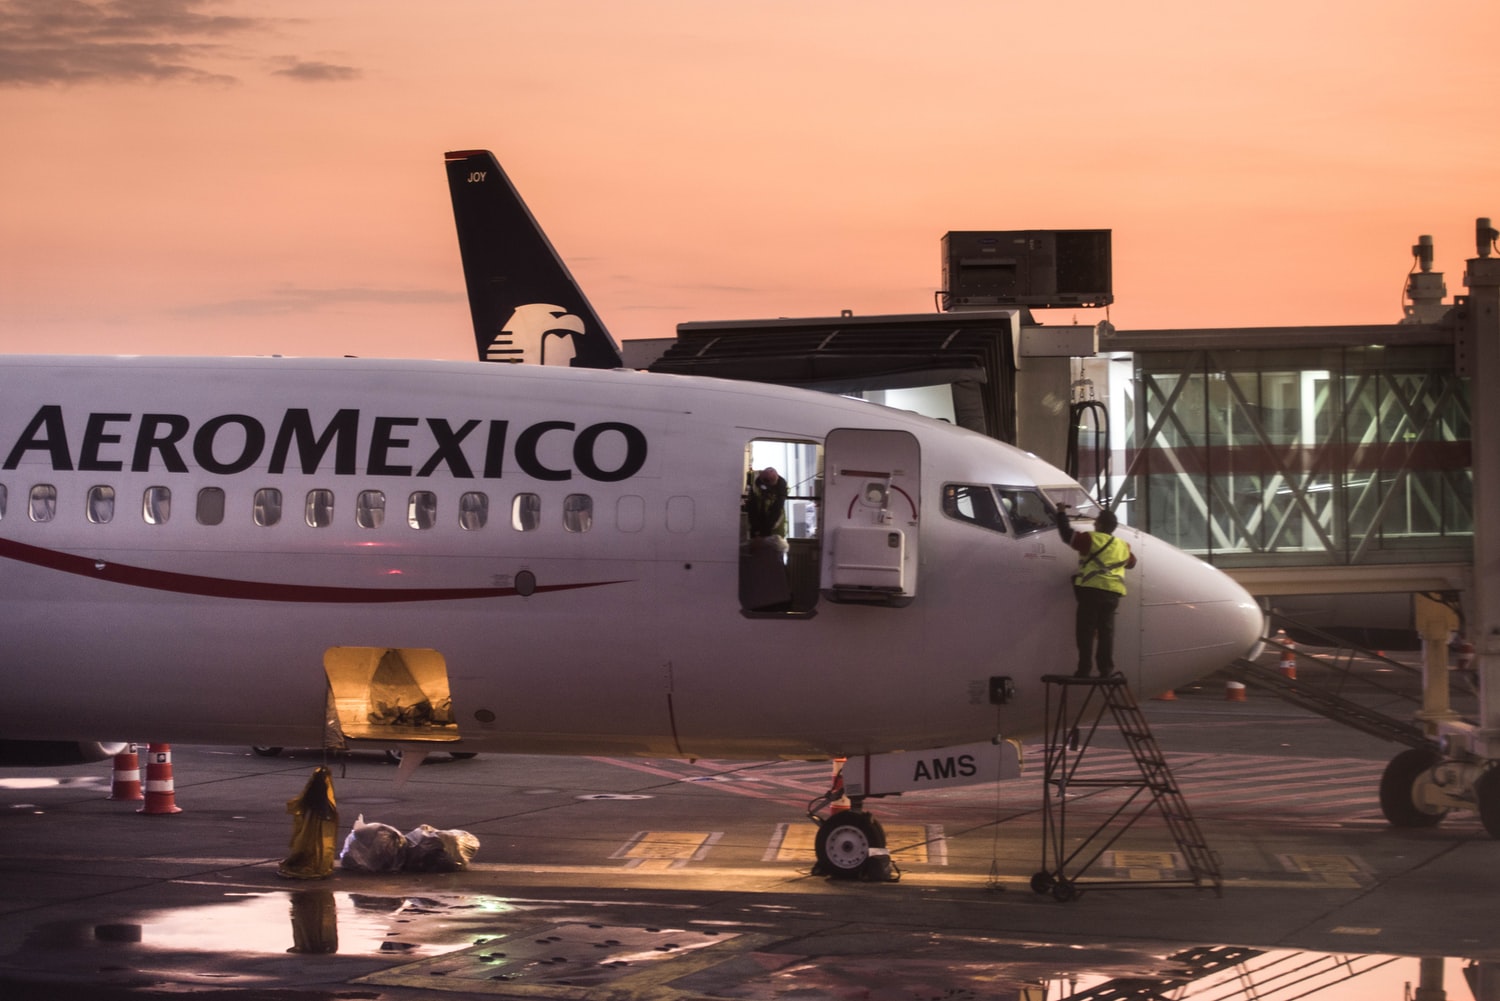 Mexico City airport at dusk, Aeromexico aircraft on the foreground